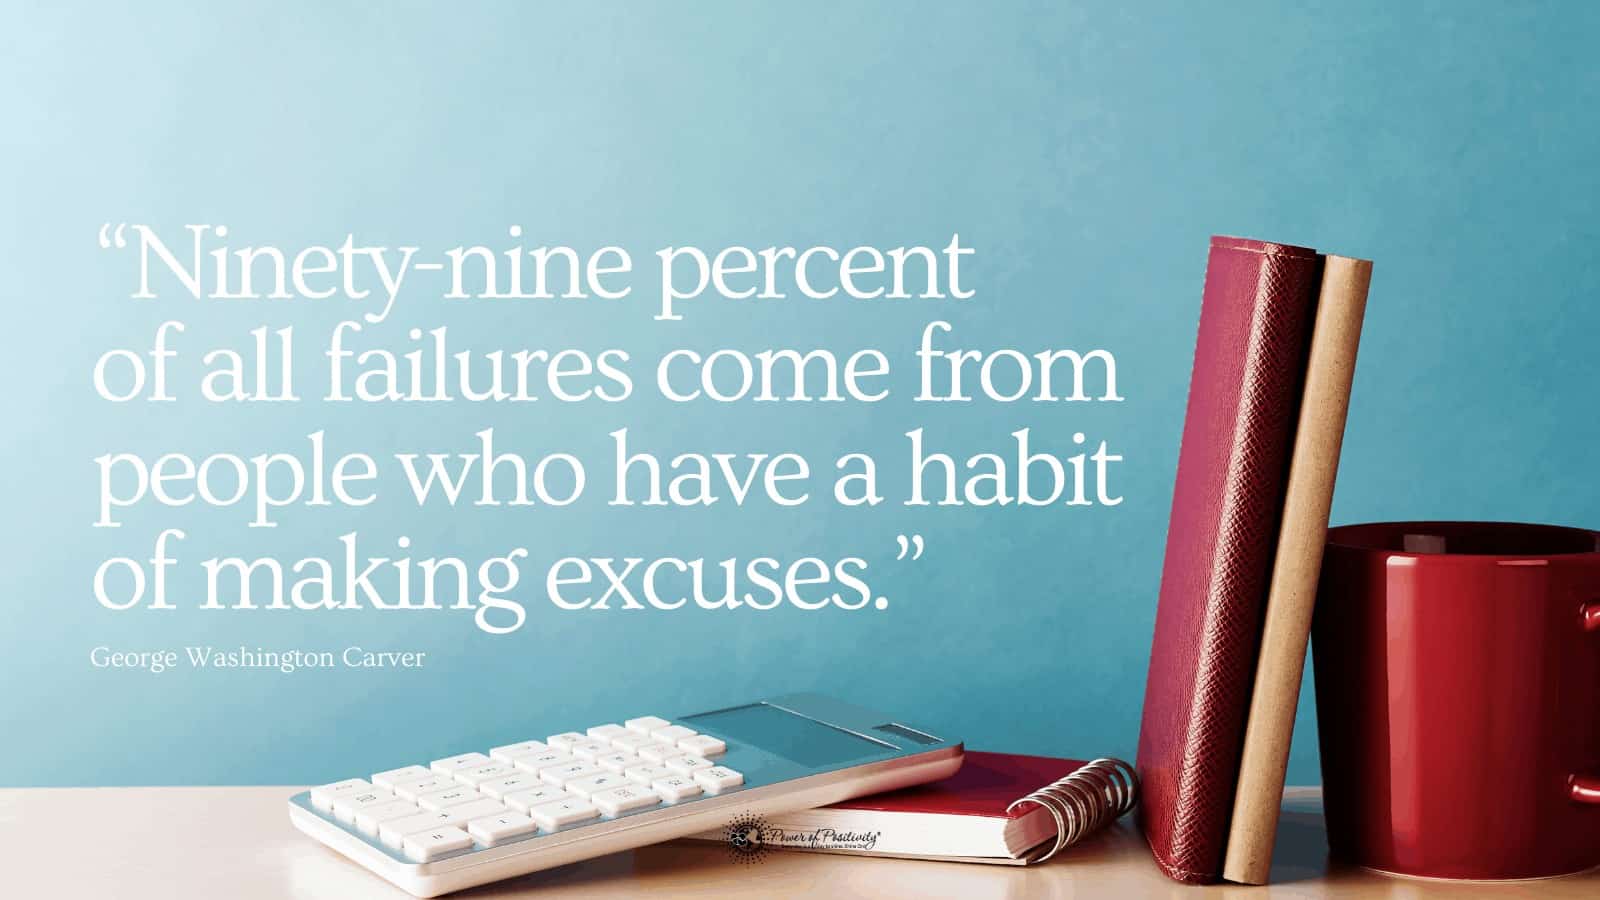 15 Quotes About Accountability That Will Change Your Life